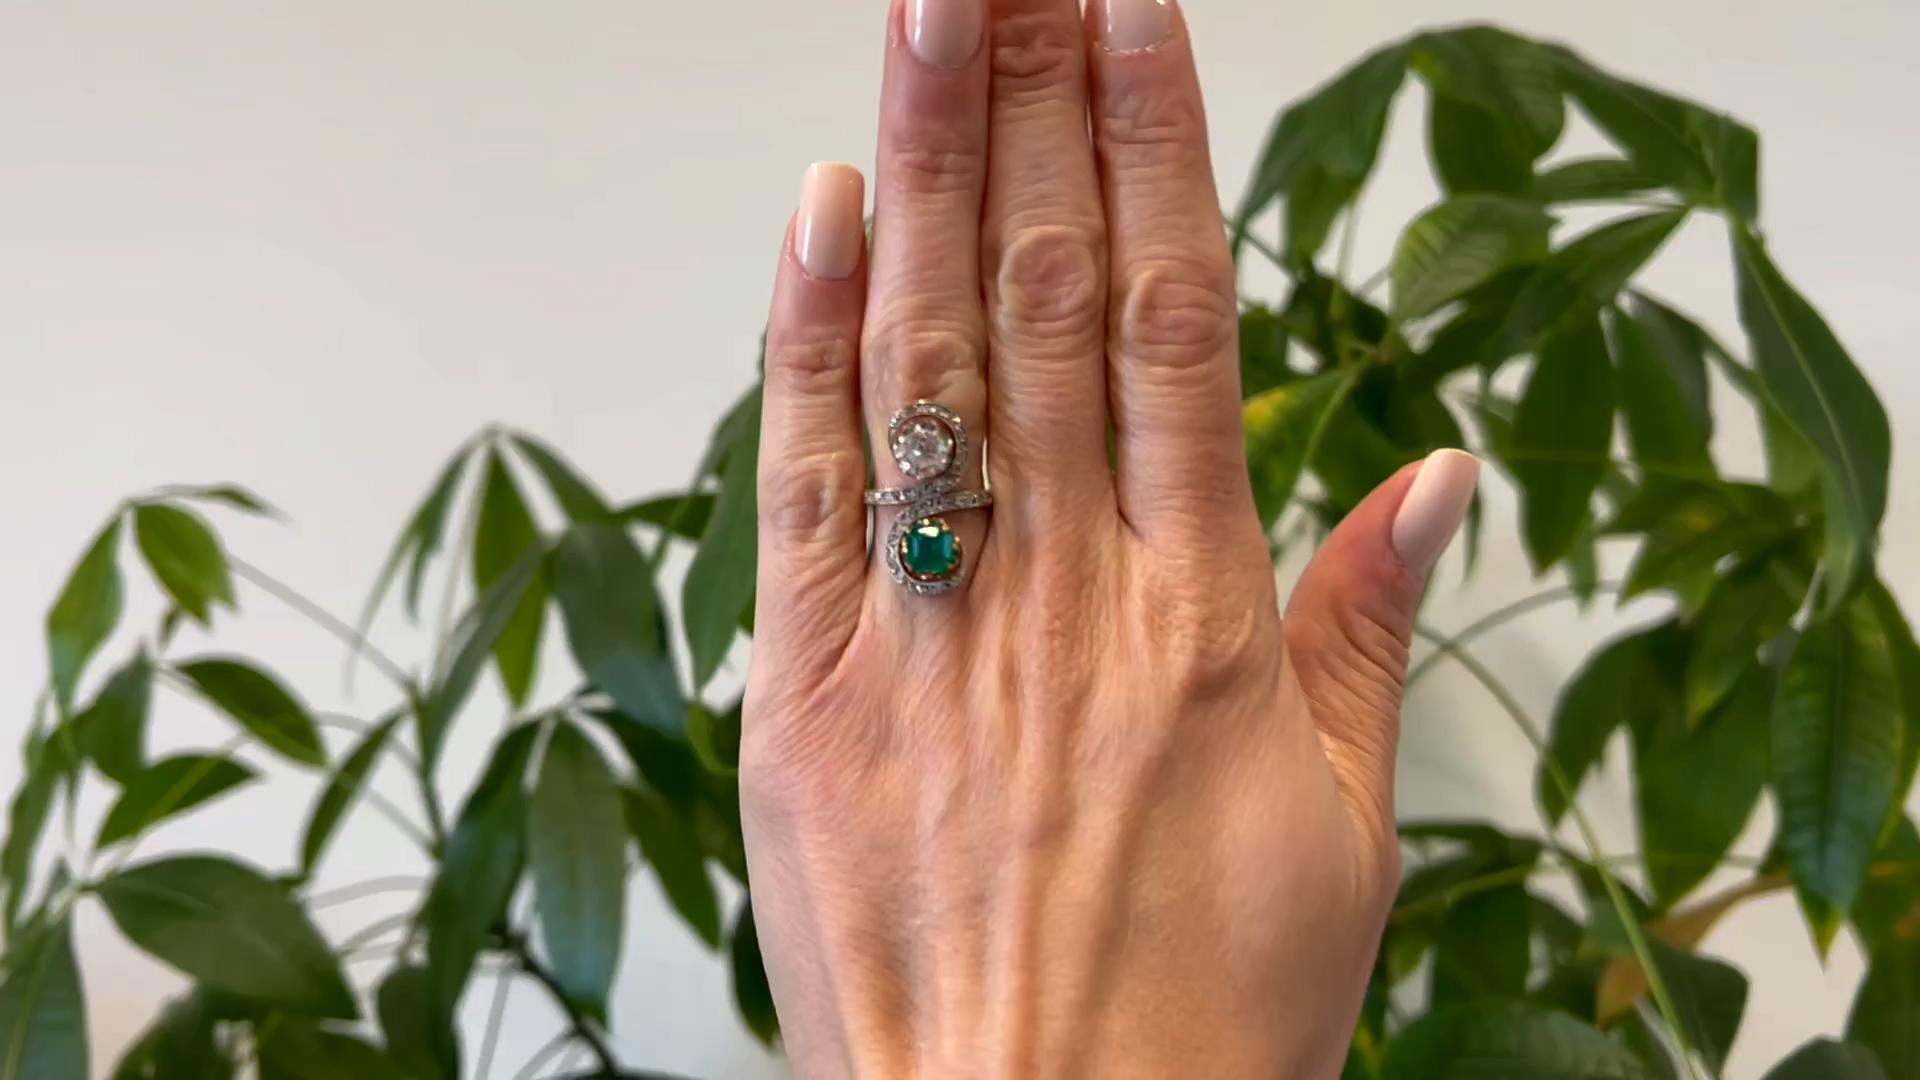 One Belle Époque French Emerald and Diamond 18k Yellow Gold Platinum Toi et Moi Ring. Featuring one old European cut diamond weighing approximately 1.45 carats, graded H color, VS2 clarity, and one octagonal step cut emerald weighing approximately